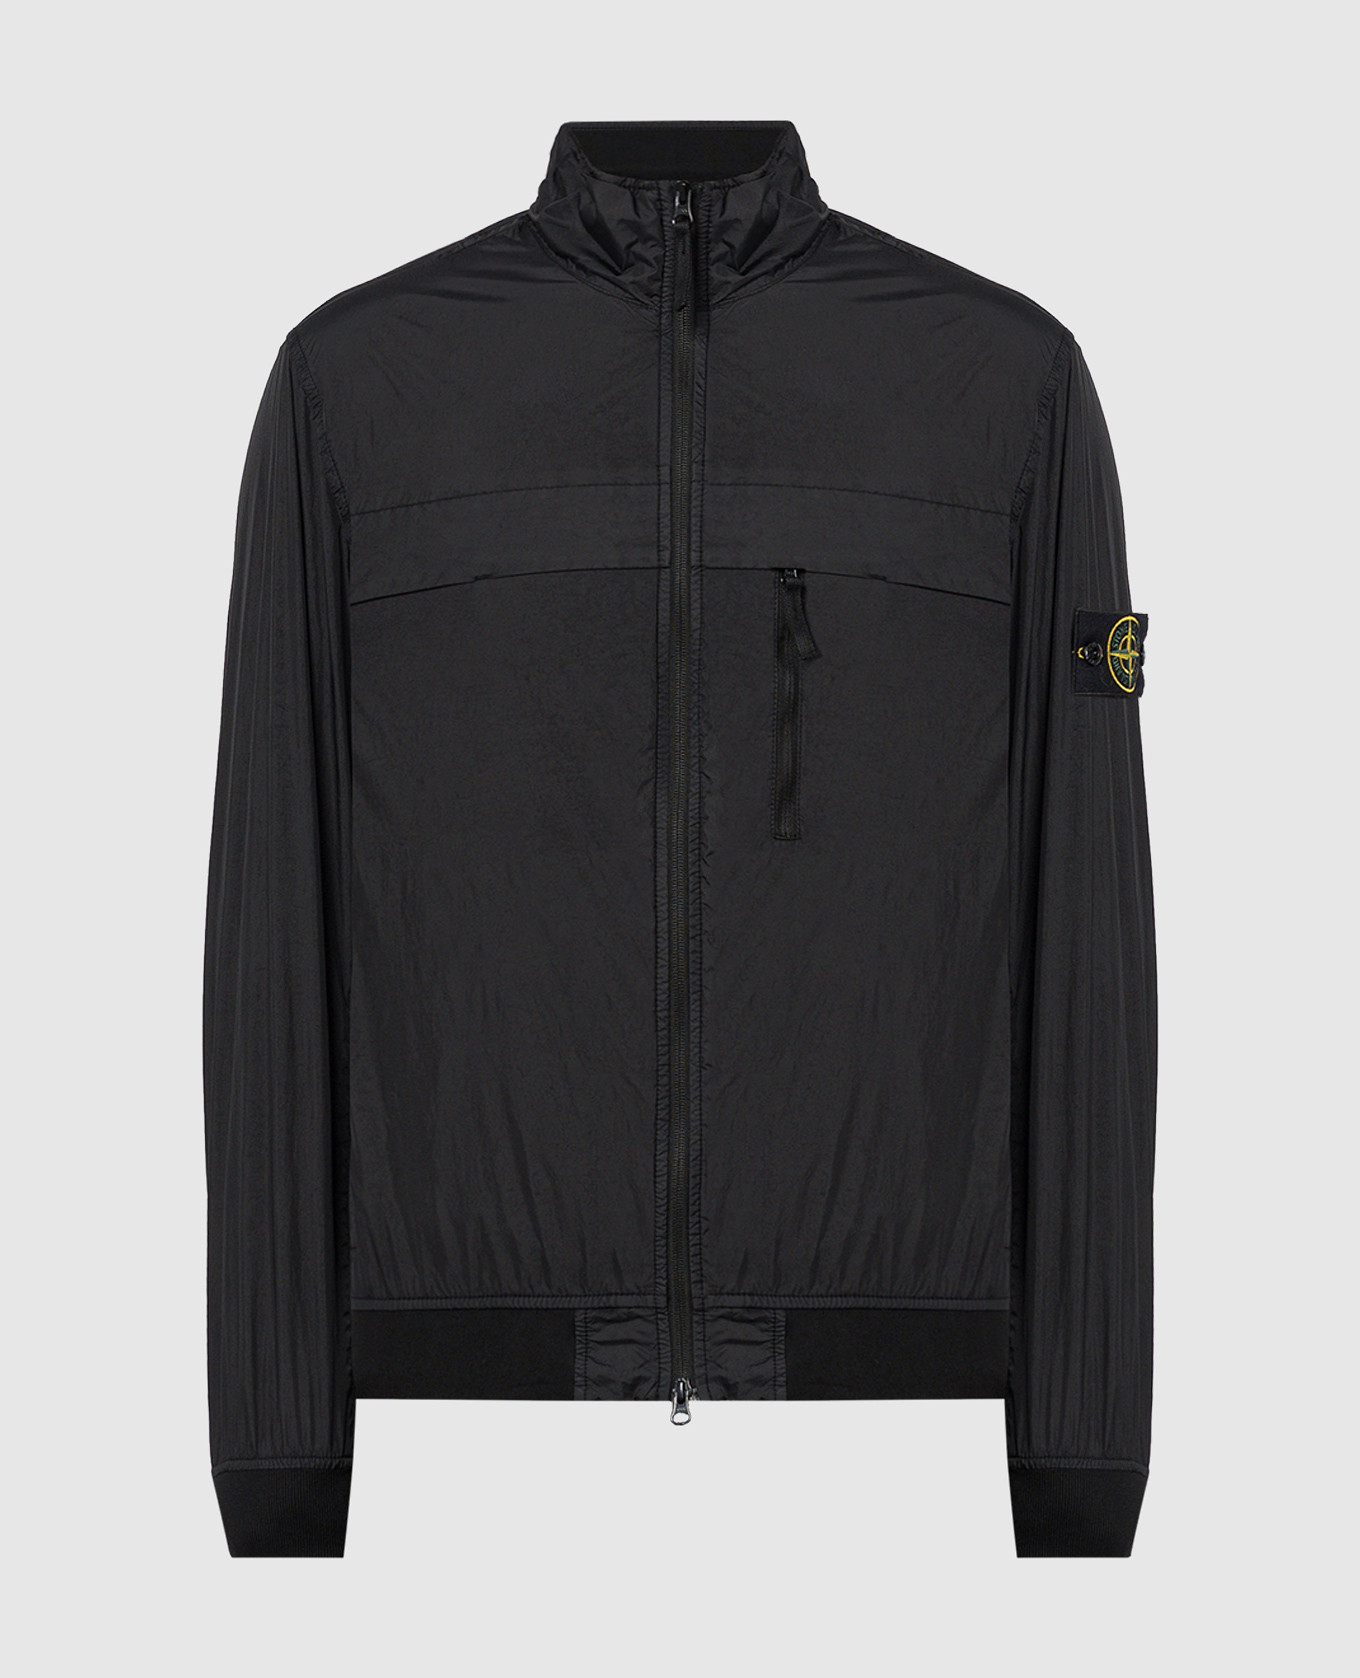 Black windbreaker with removable logo patch